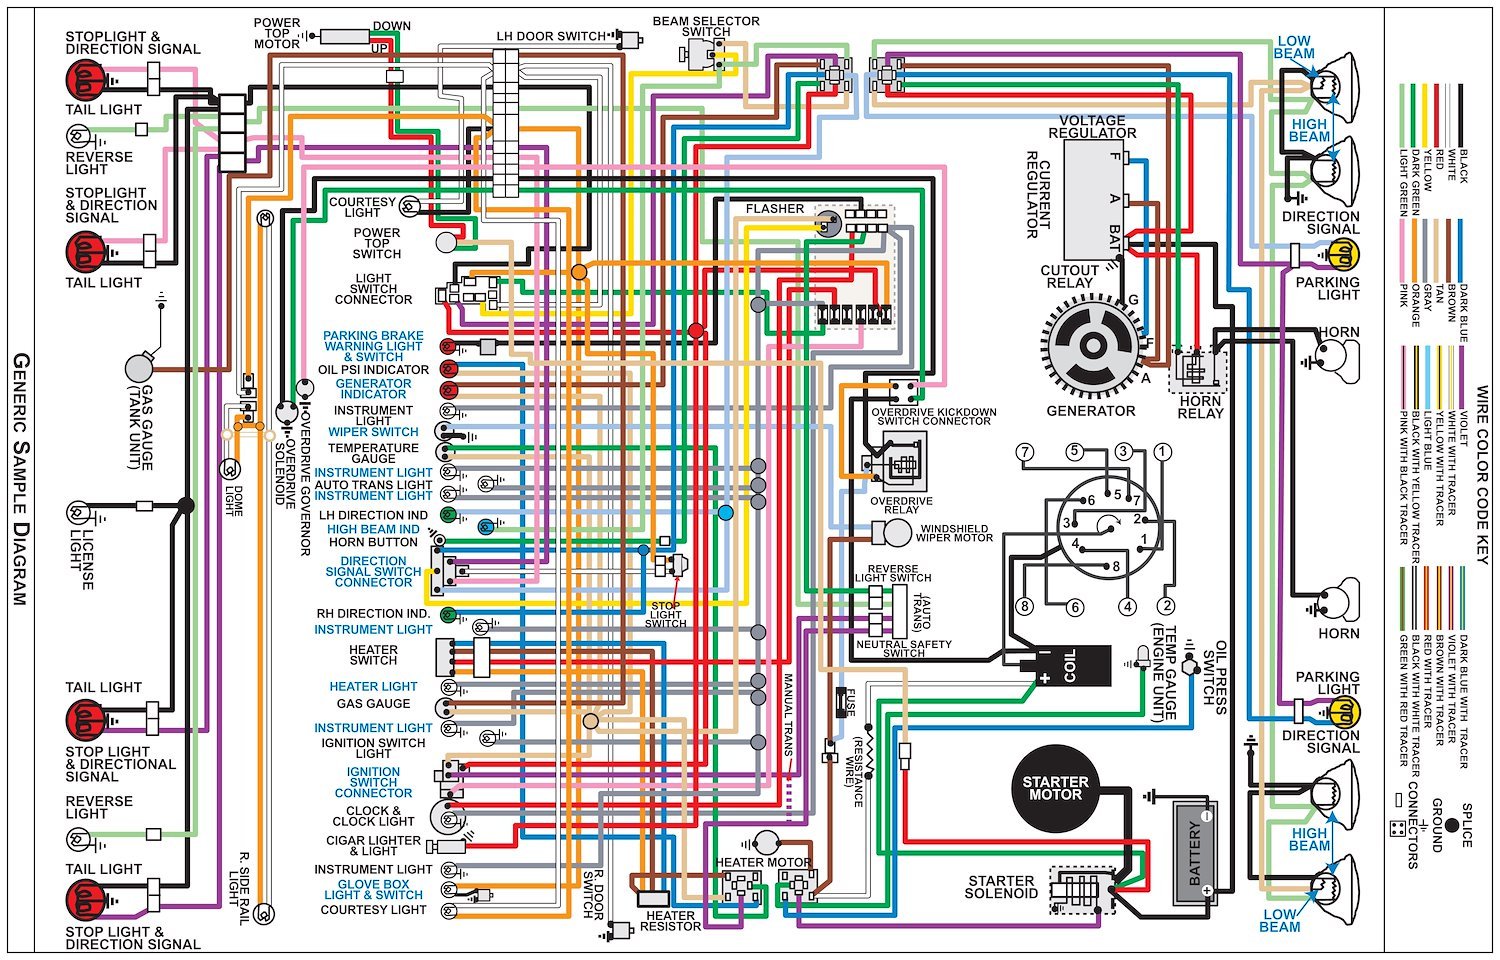 Wiring Diagram for 1970-1971 Chevy Chevelle, El Camino,